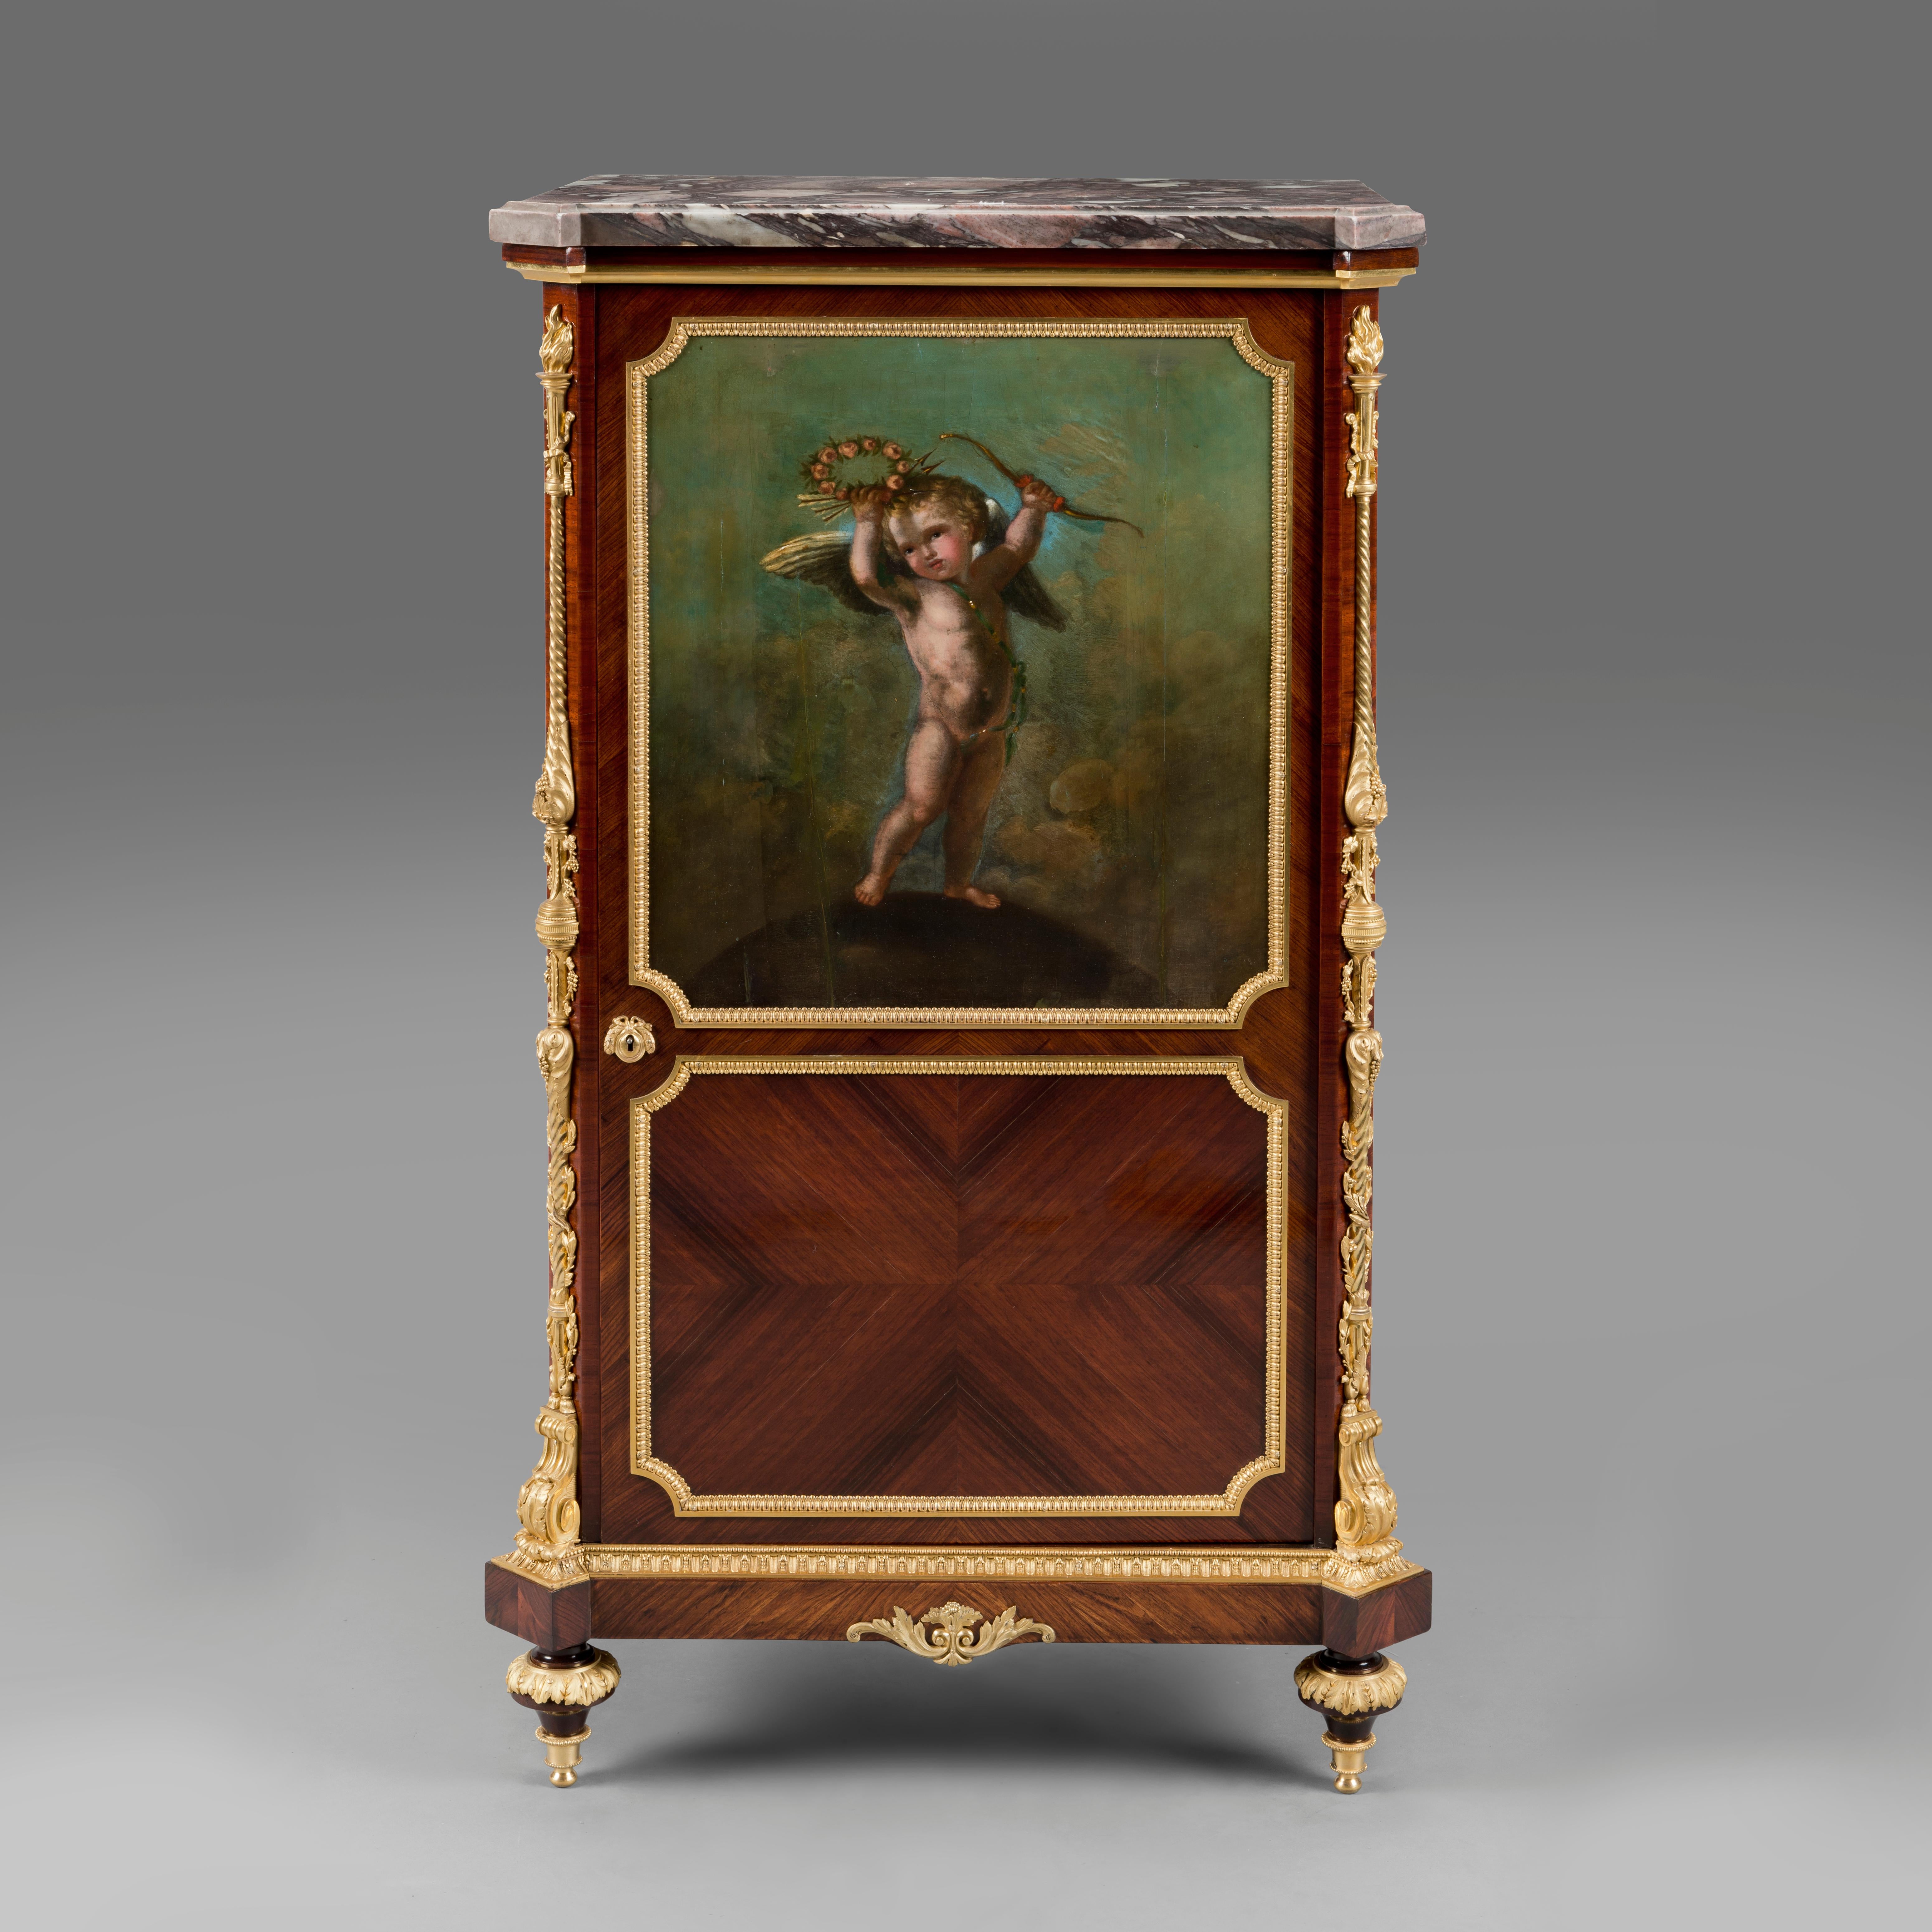 A fine Louis XVI style gilt-bronze mounted cabinet with a Vernis martin panel, in the manner of Paul Sormani.

This elegant cabinet has a rectangular Seravezza marble top with canted corners above a conforming case with fine crossbanded veneers.